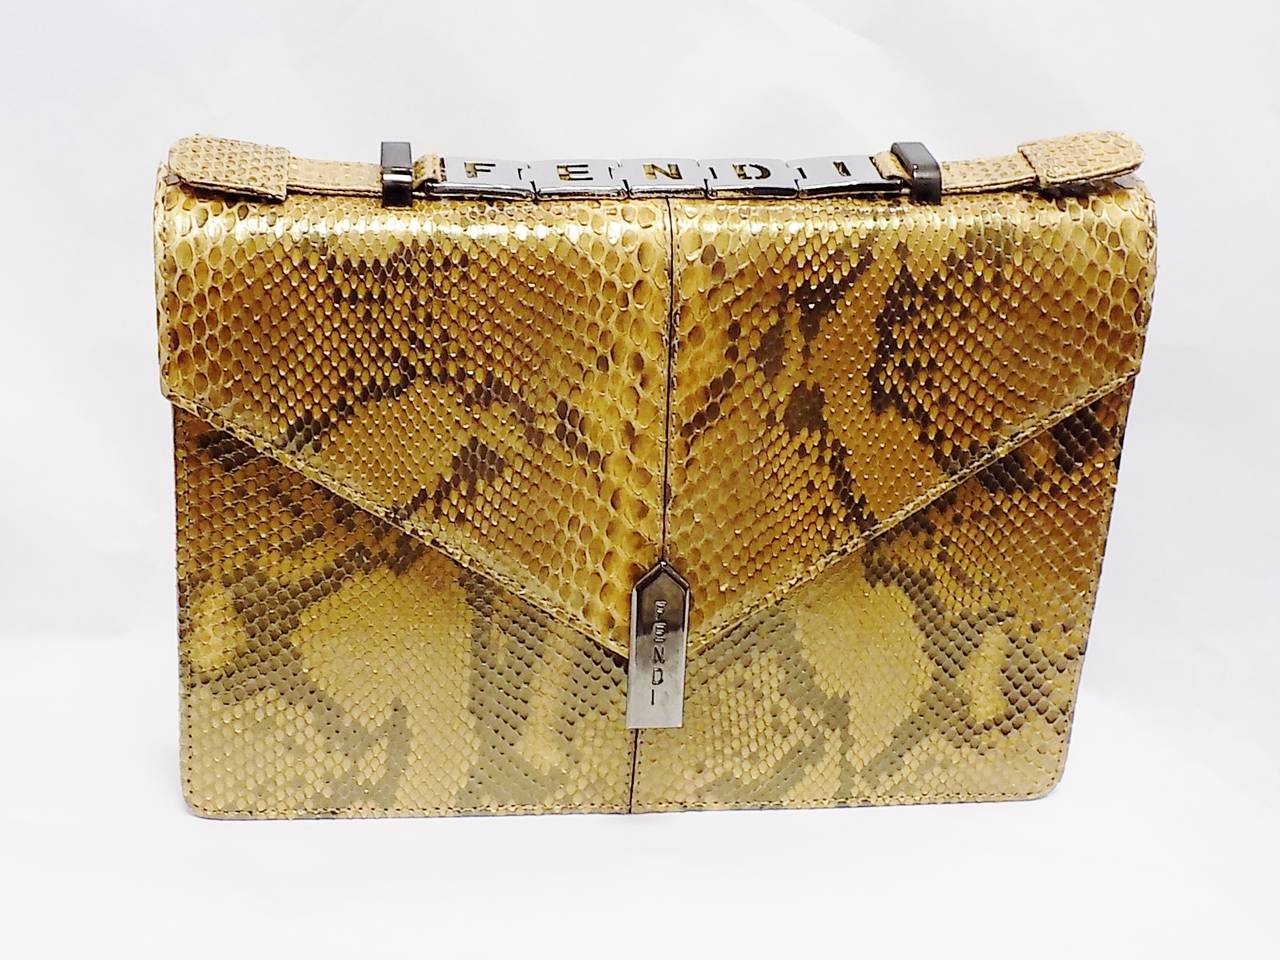 New and never used Fendi special order bag  in python from 1996 with all documents  so awesome! One of a Kind 
Origin of Python Diamante  from Indonesia with license number to be shipped to Fendi as a special order. 
Bag is envelope style clutch